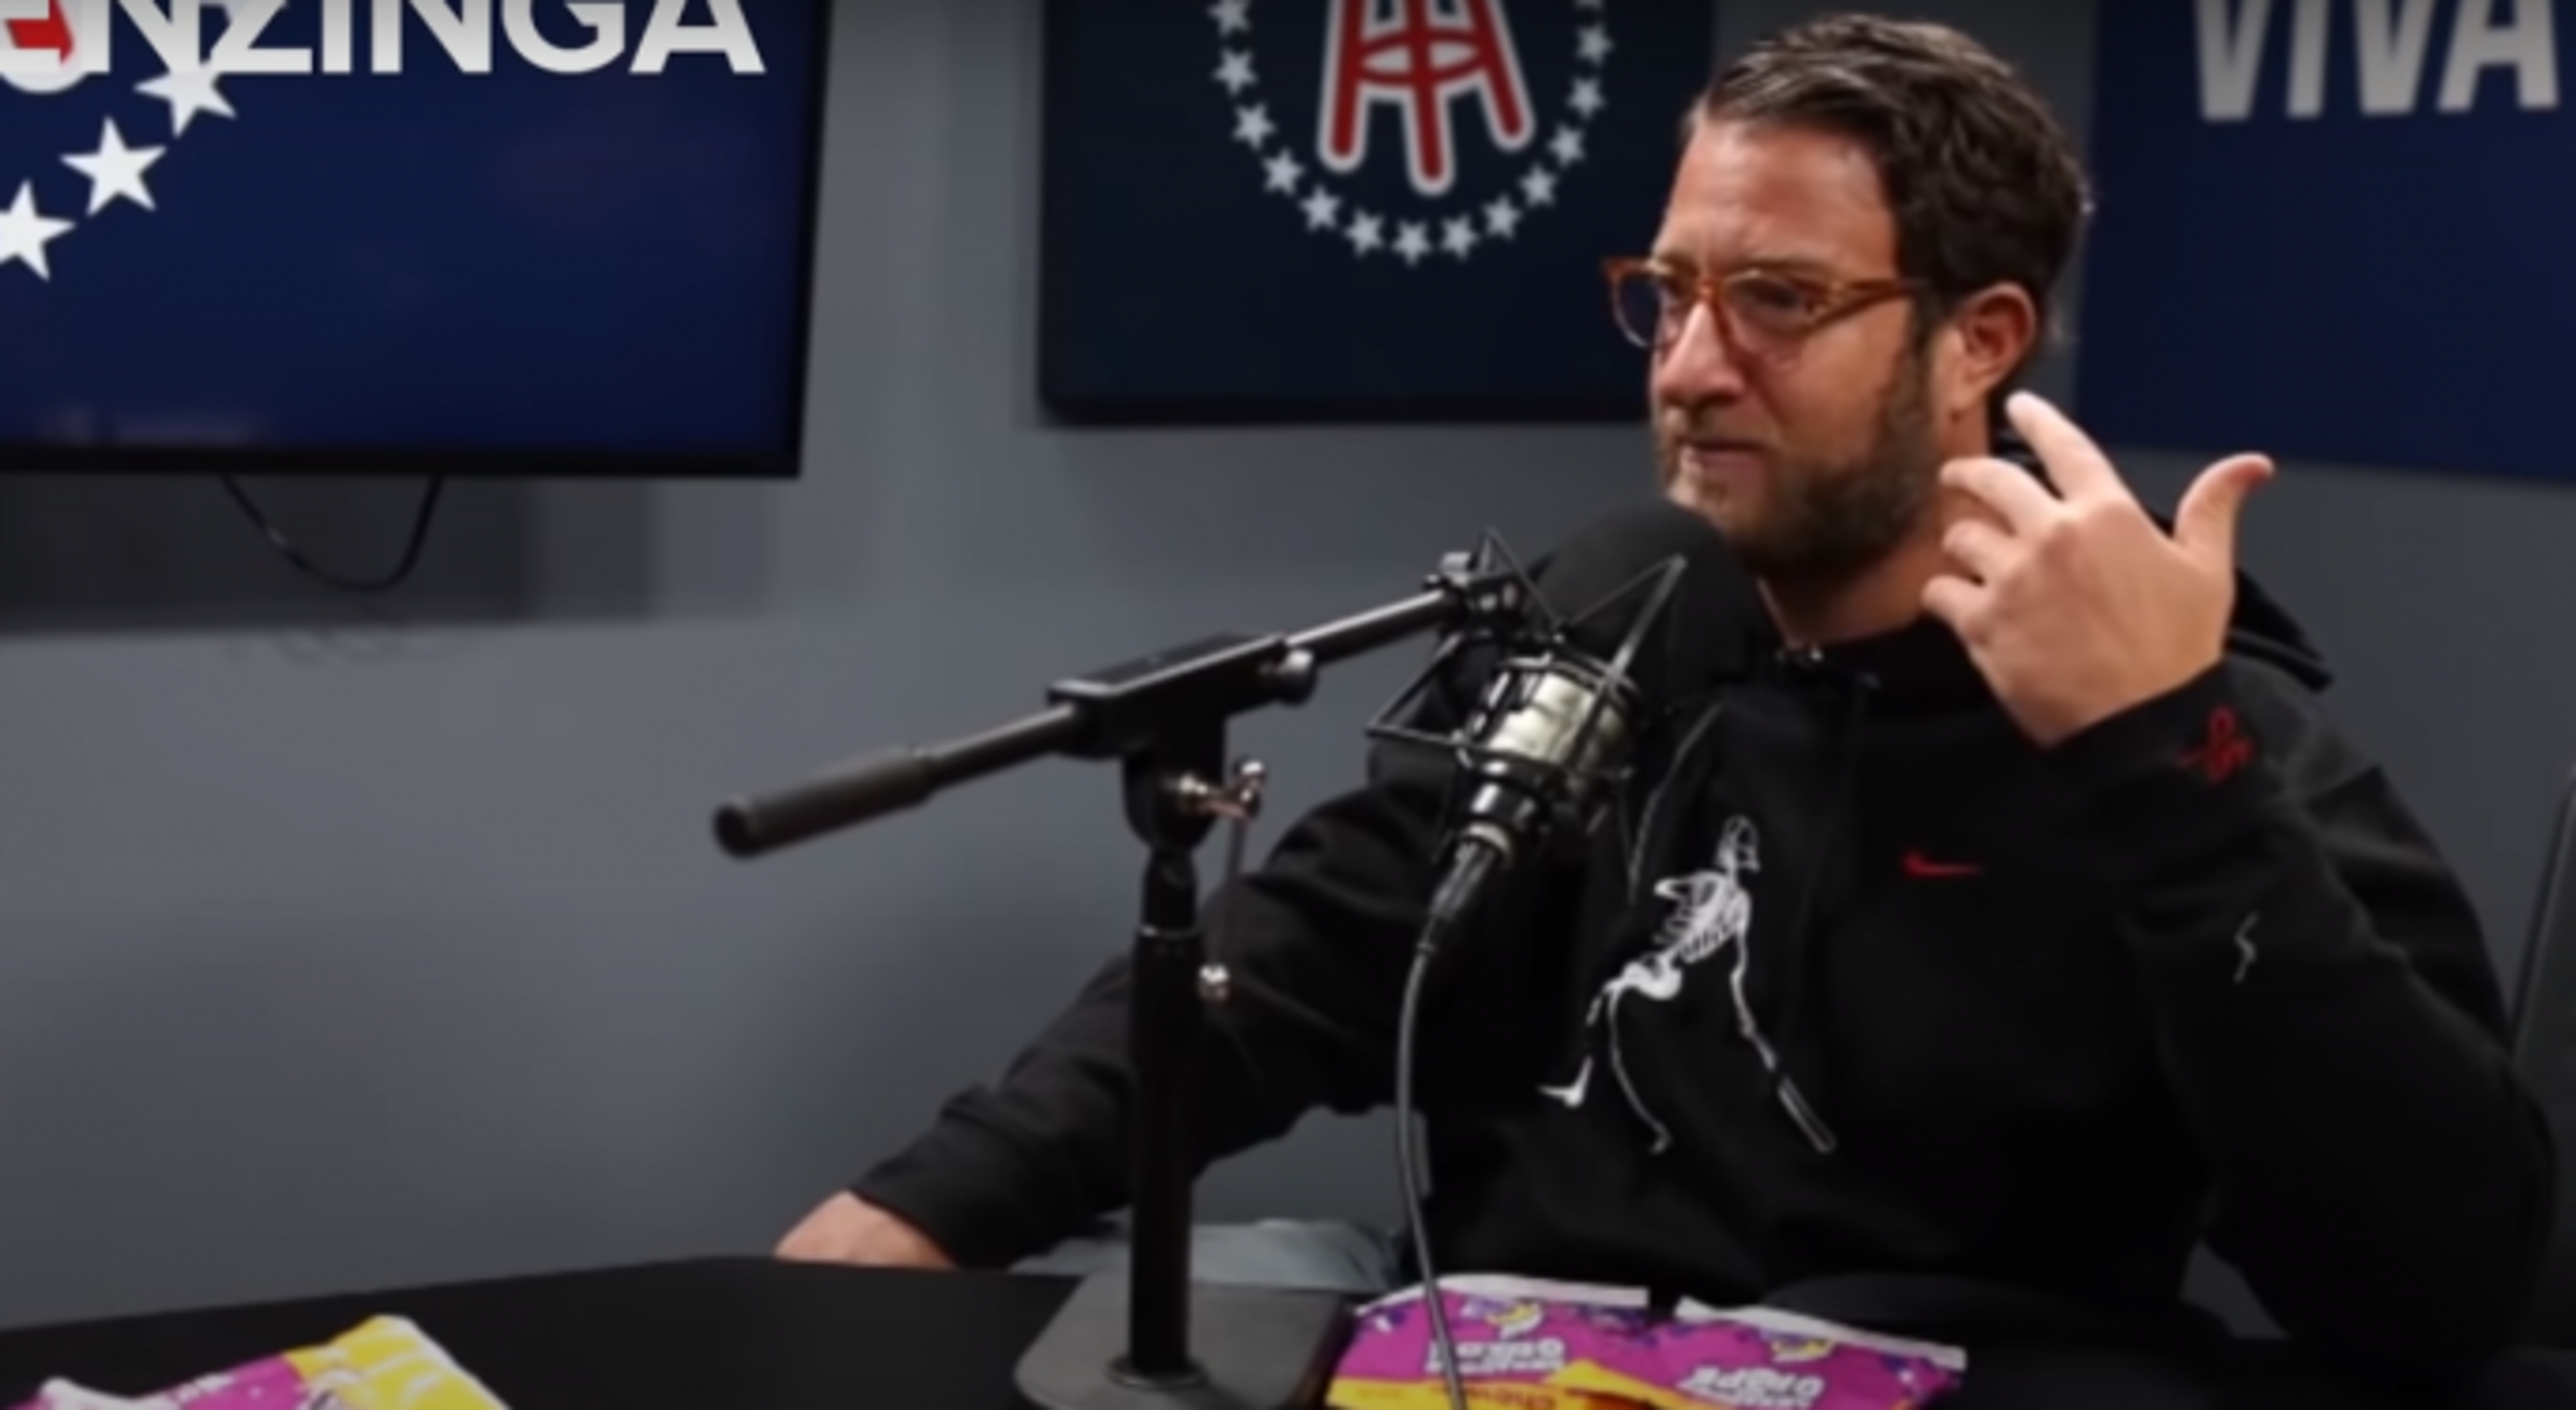 Barstool&#39;s Dave Portnoy Responds To Salacious Sexual Allegations: &#39;Not True... I Have A Target On My Back&#39;